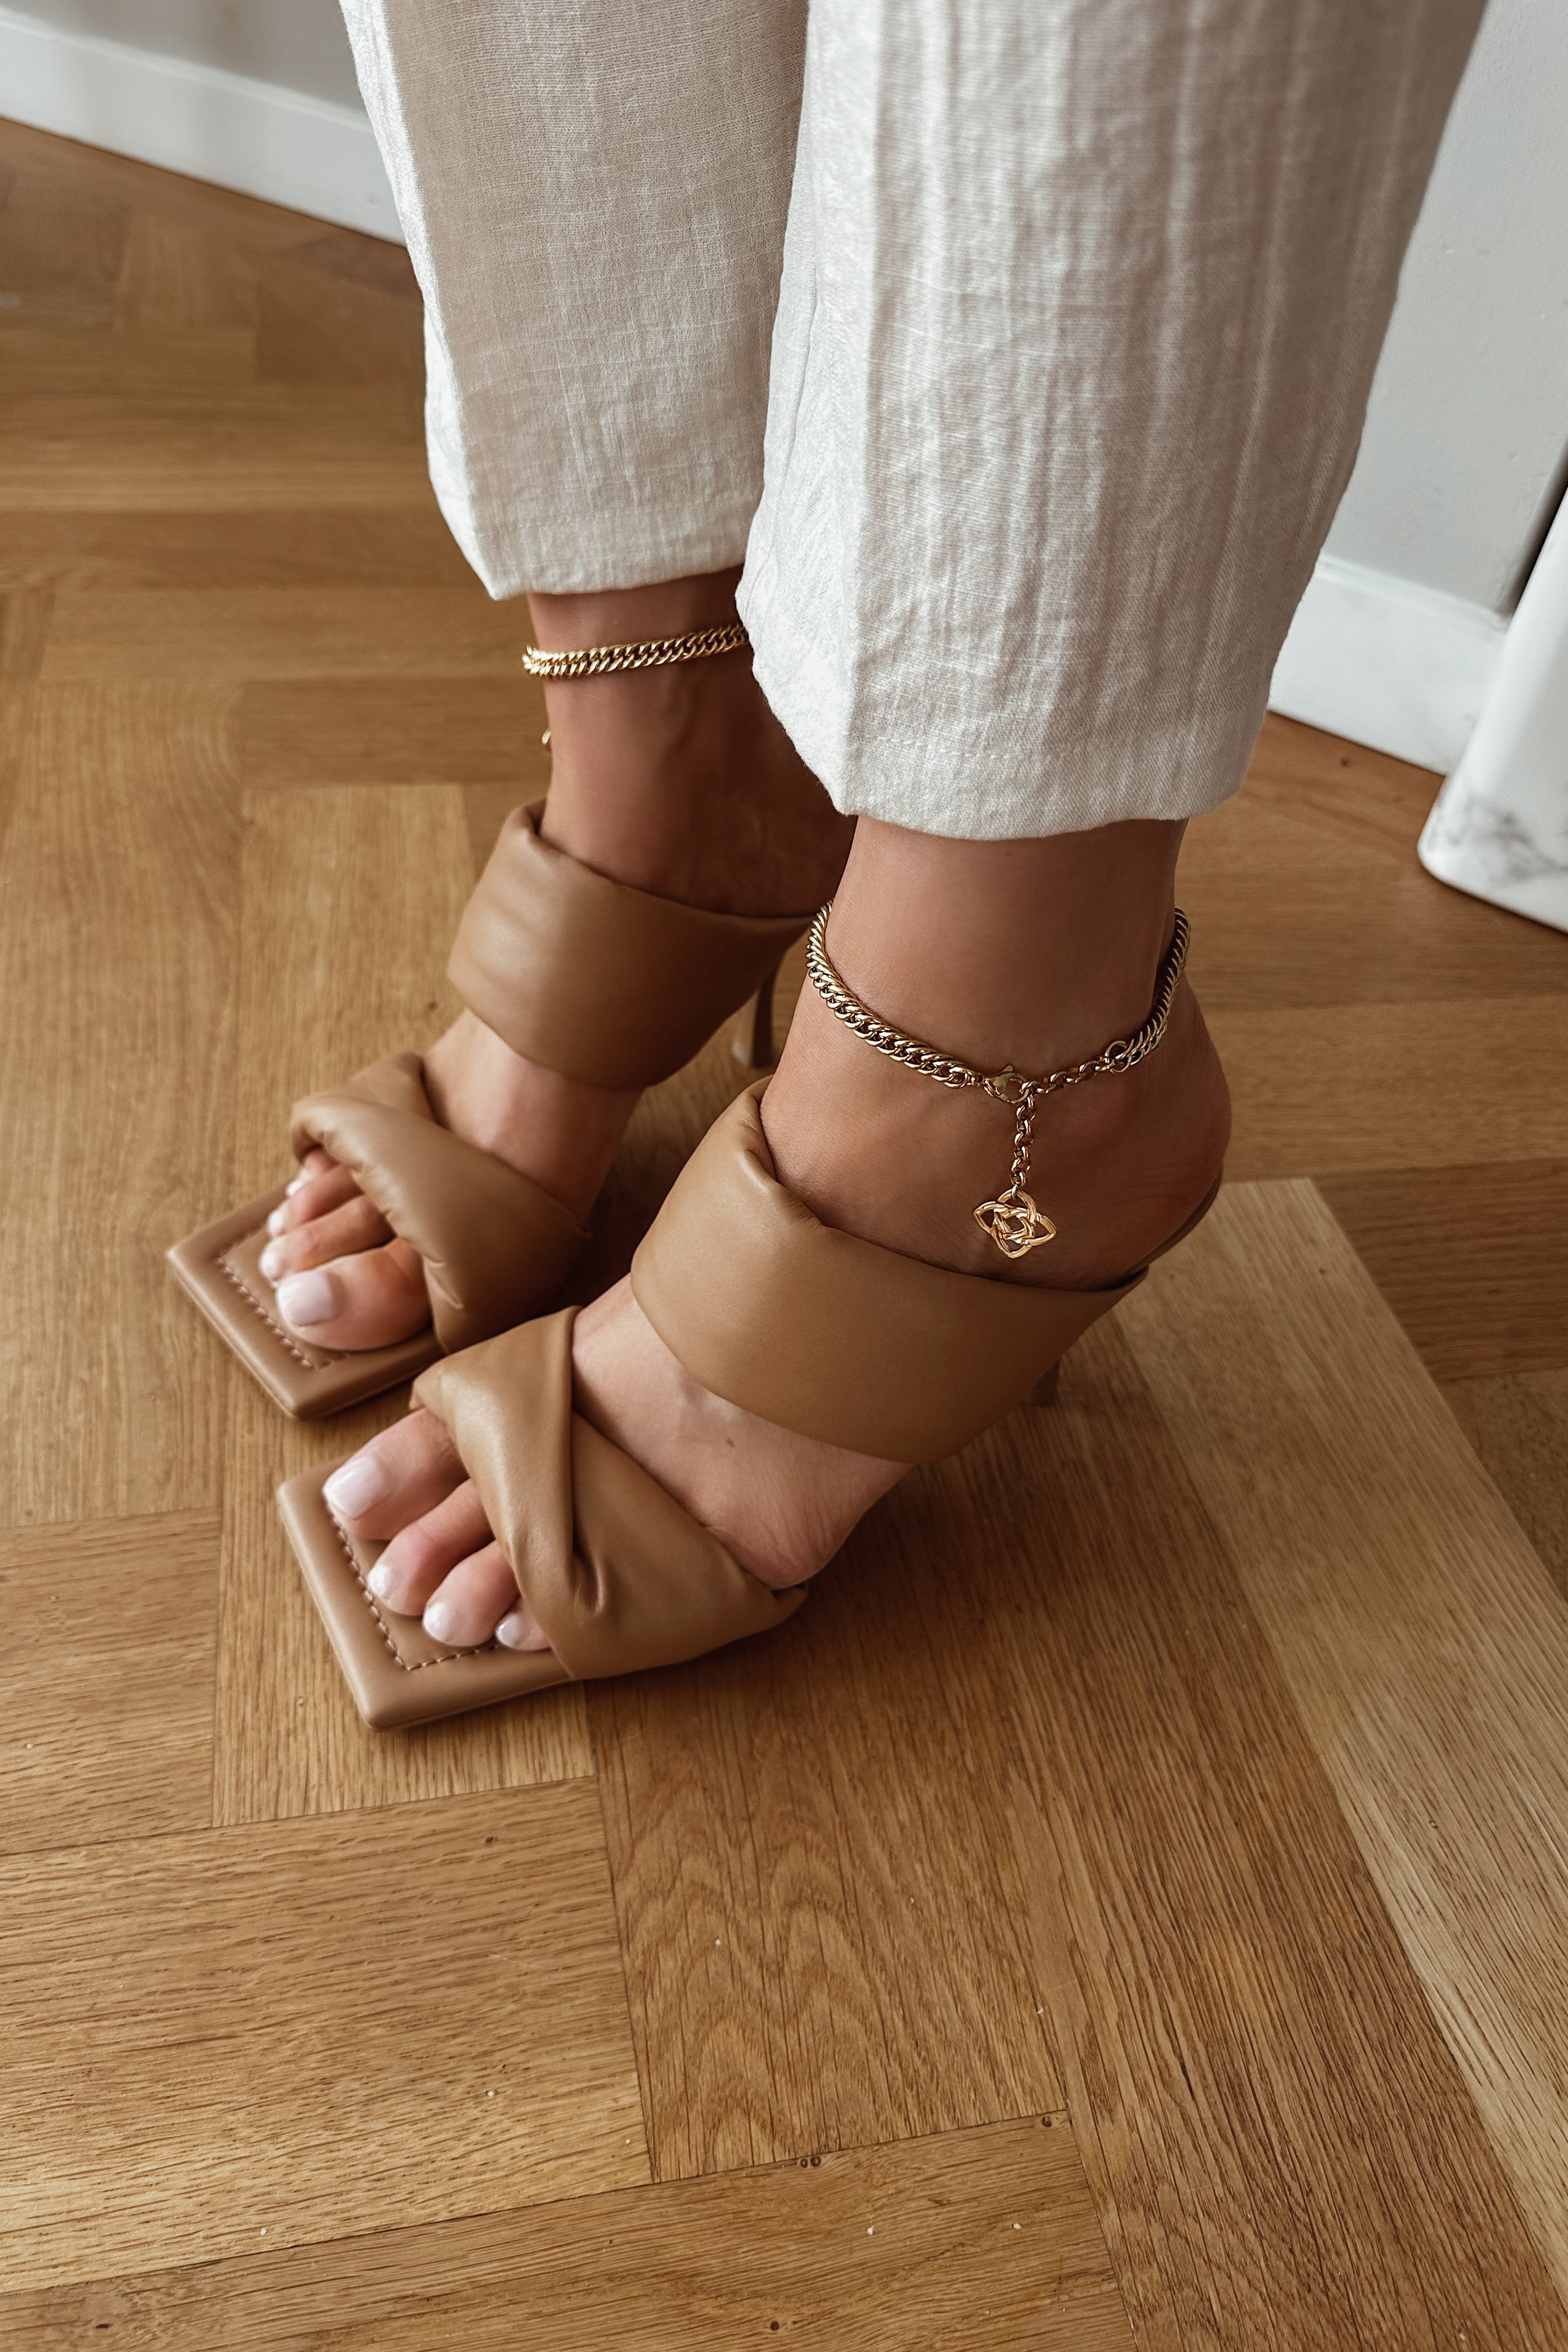 Winona Anklet - Boutique Minimaliste has waterproof, durable, elegant and vintage inspired jewelry